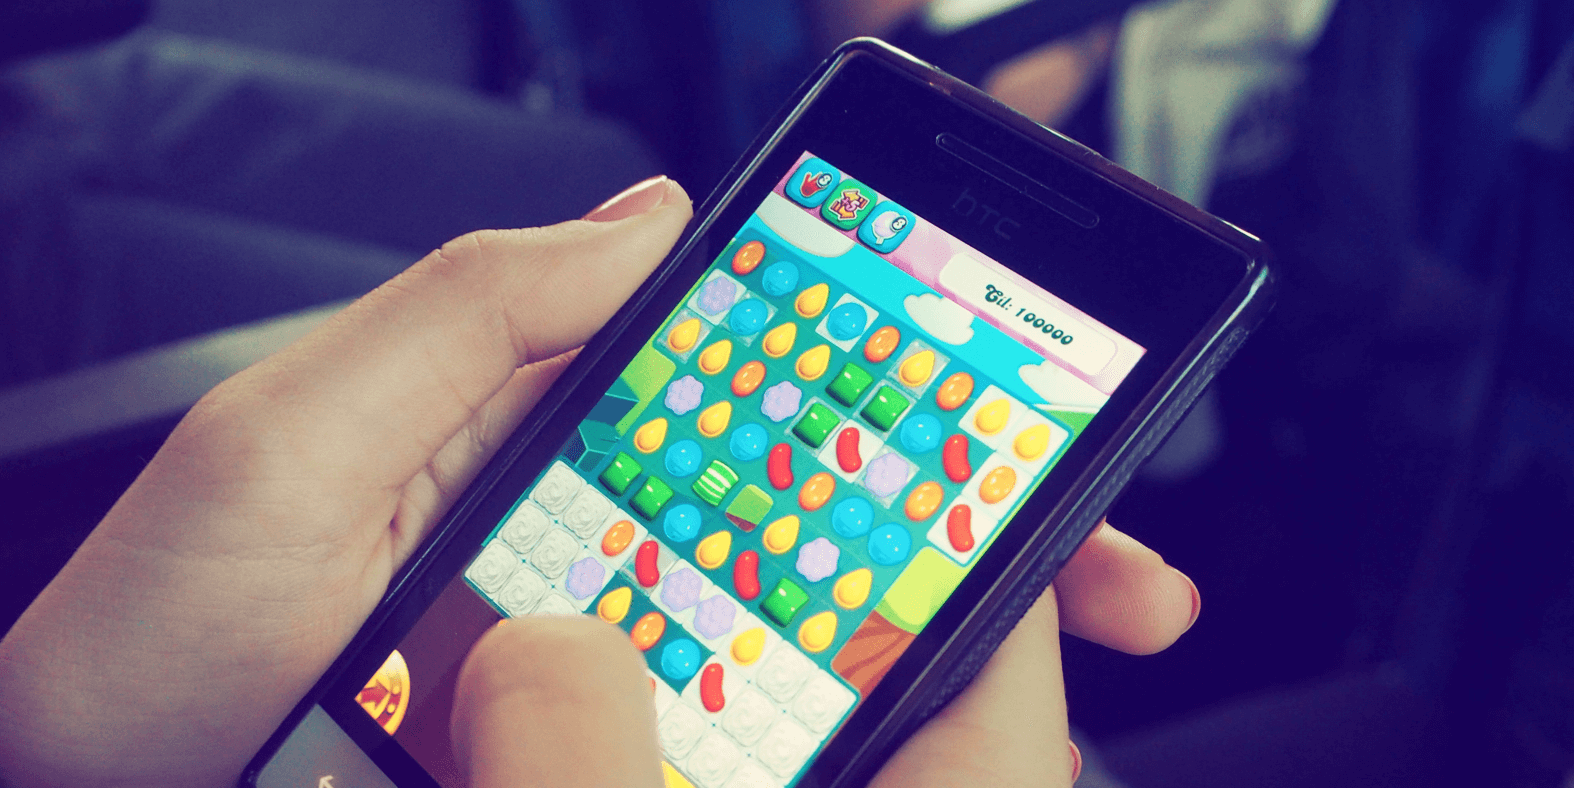 Mobile games use dynamic pricing to generate revenue